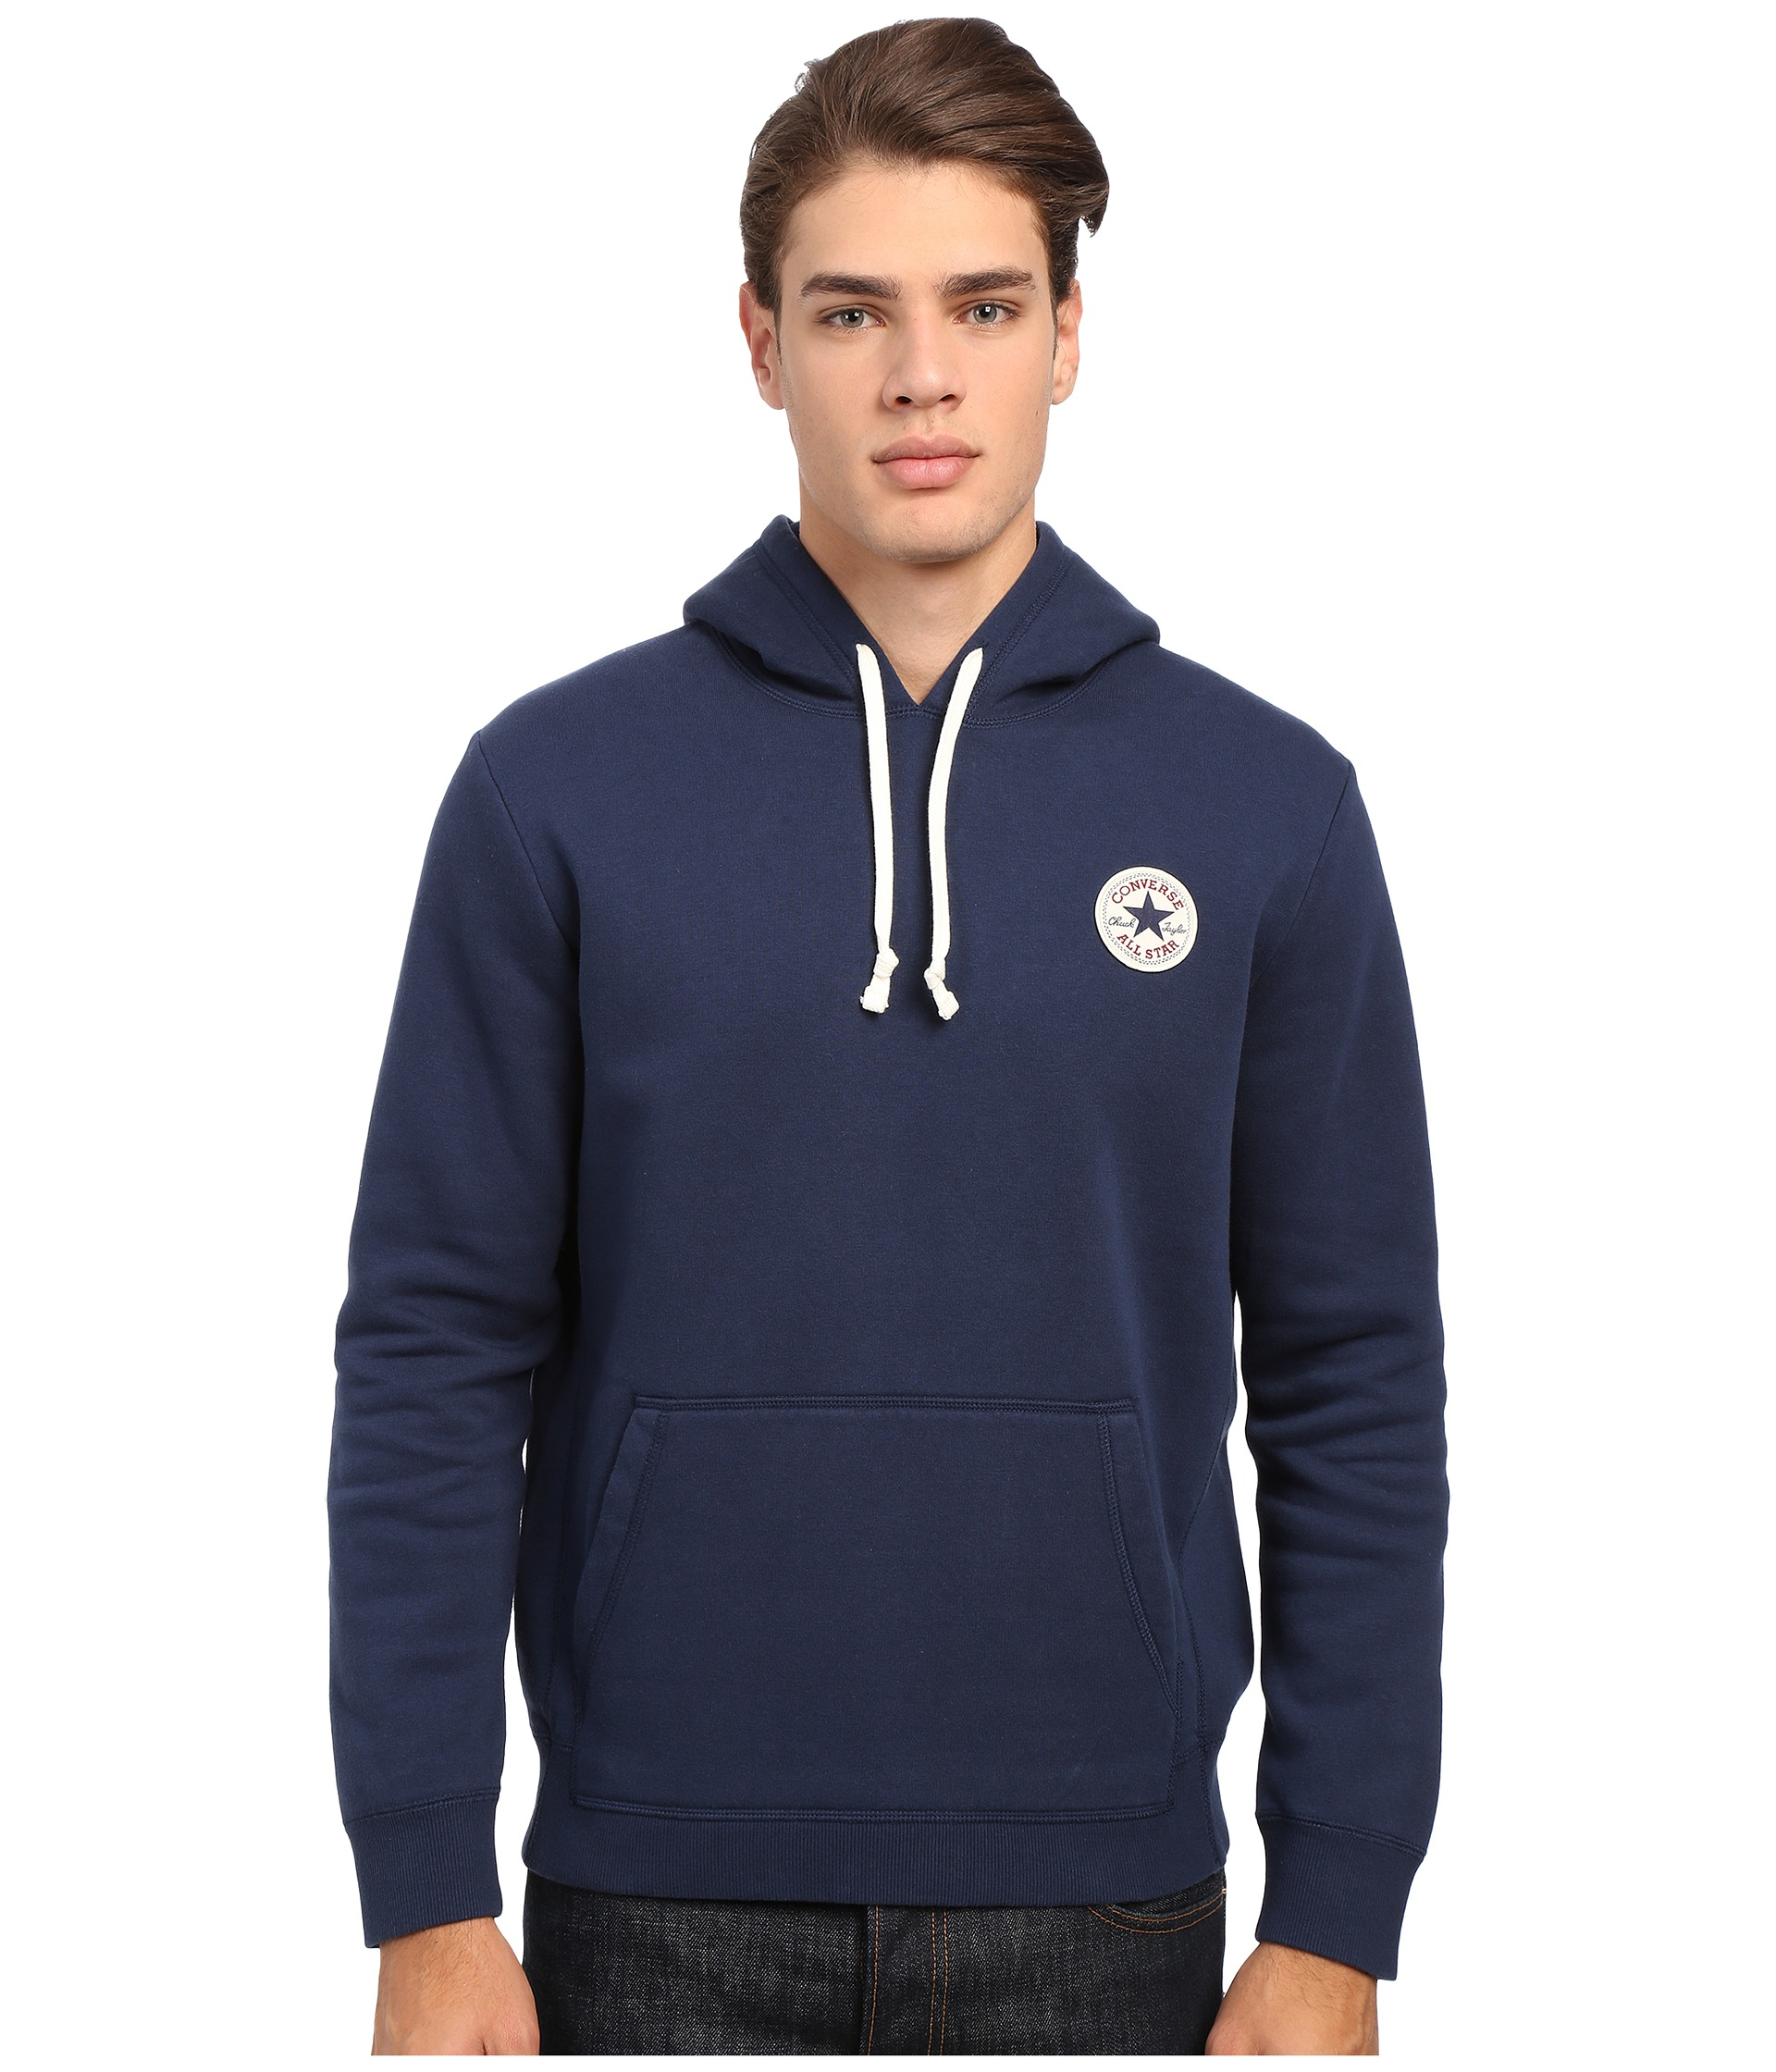 Converse hoodie – made of pure cotton!